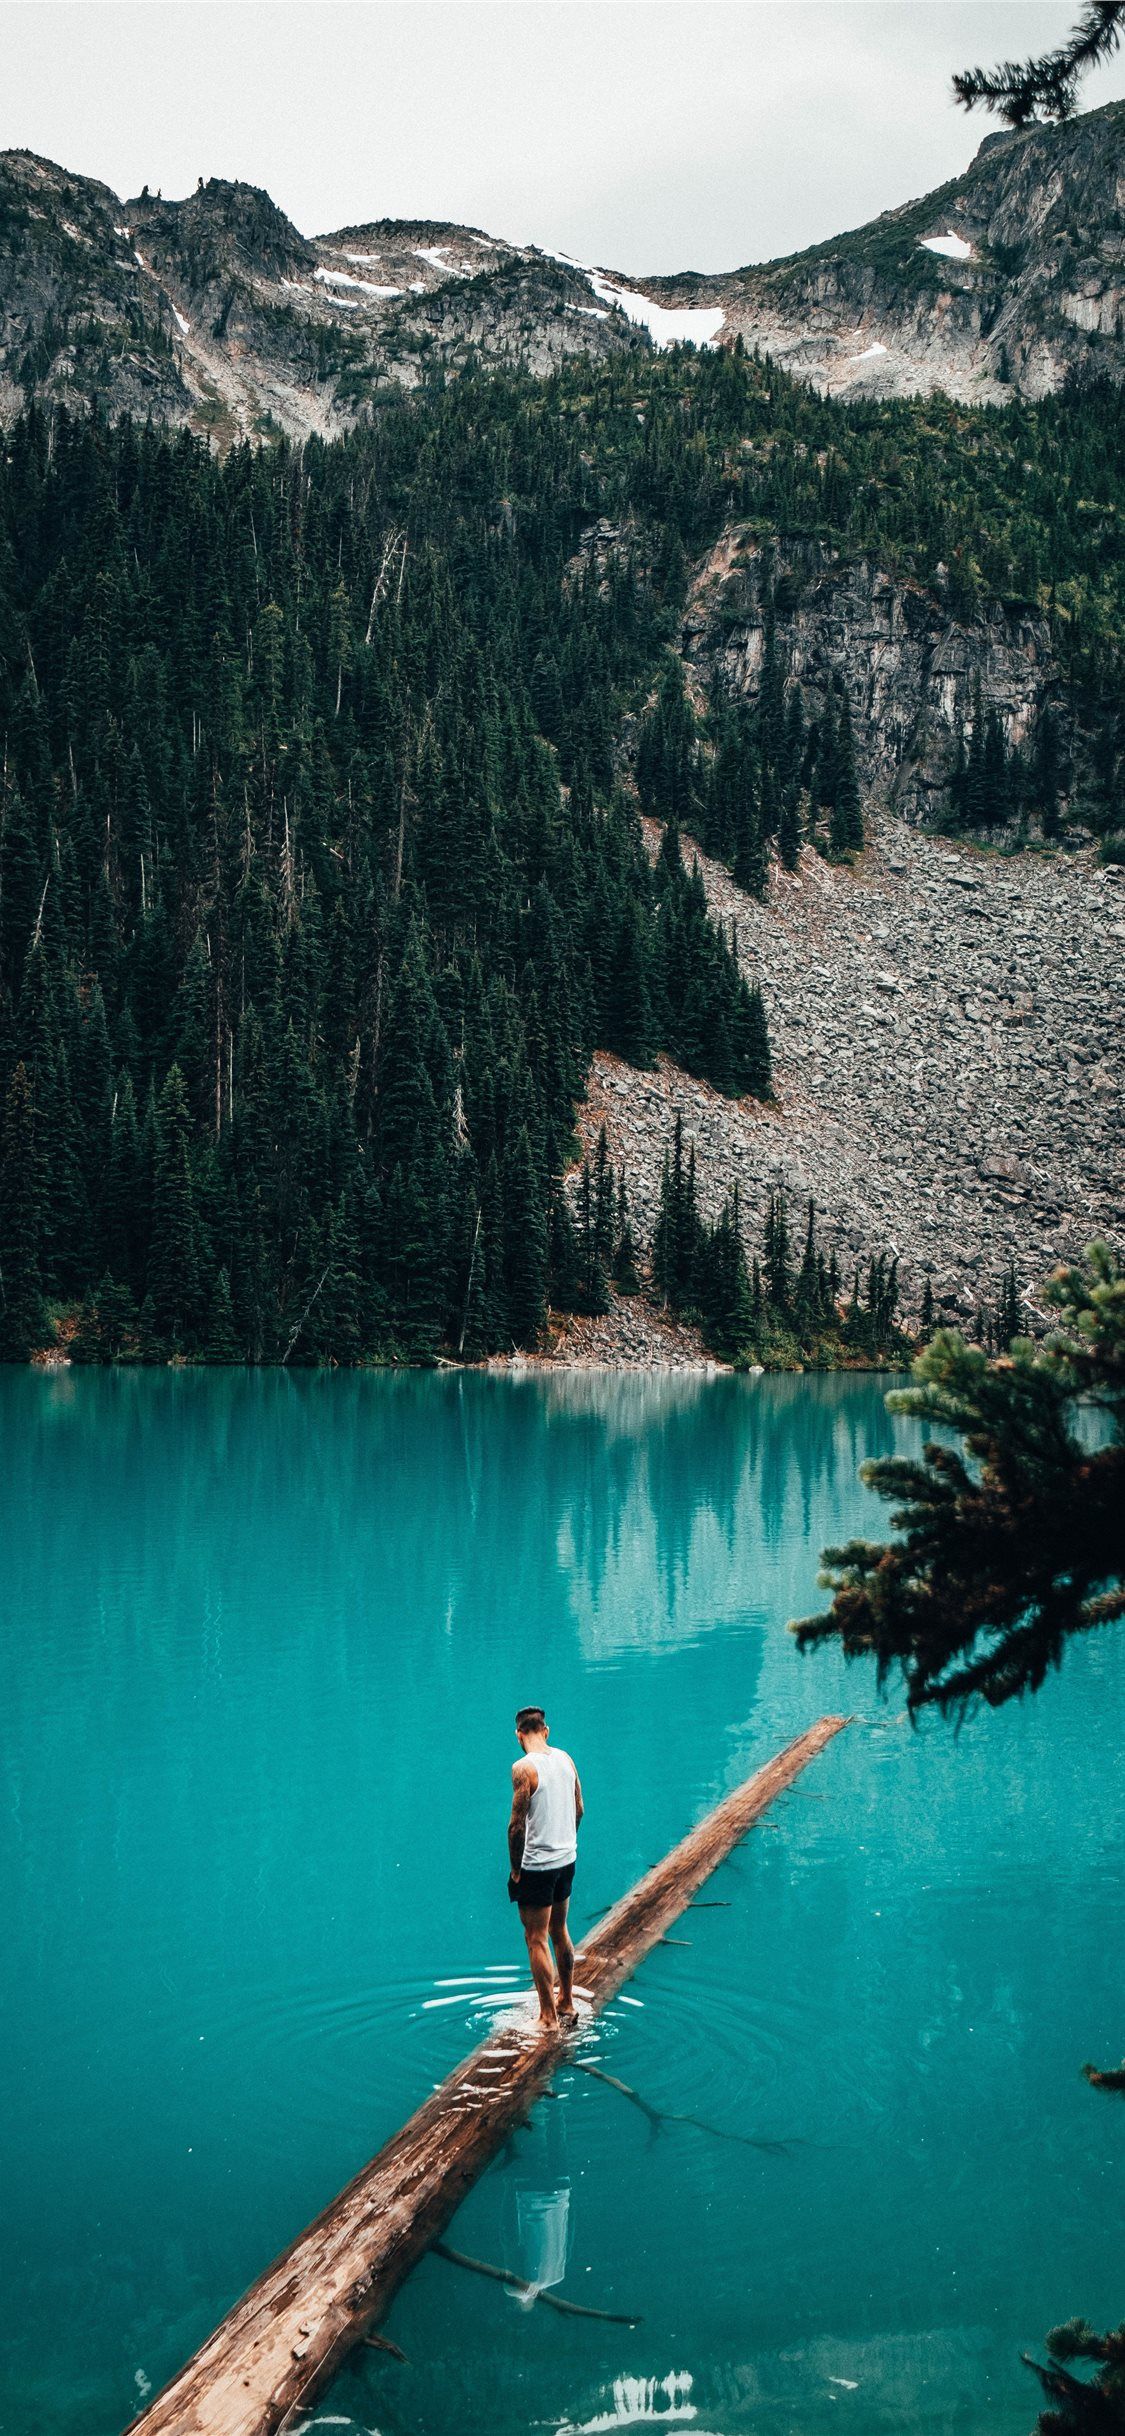 A man standing on a log in a lake surrounded by mountains. - Lake